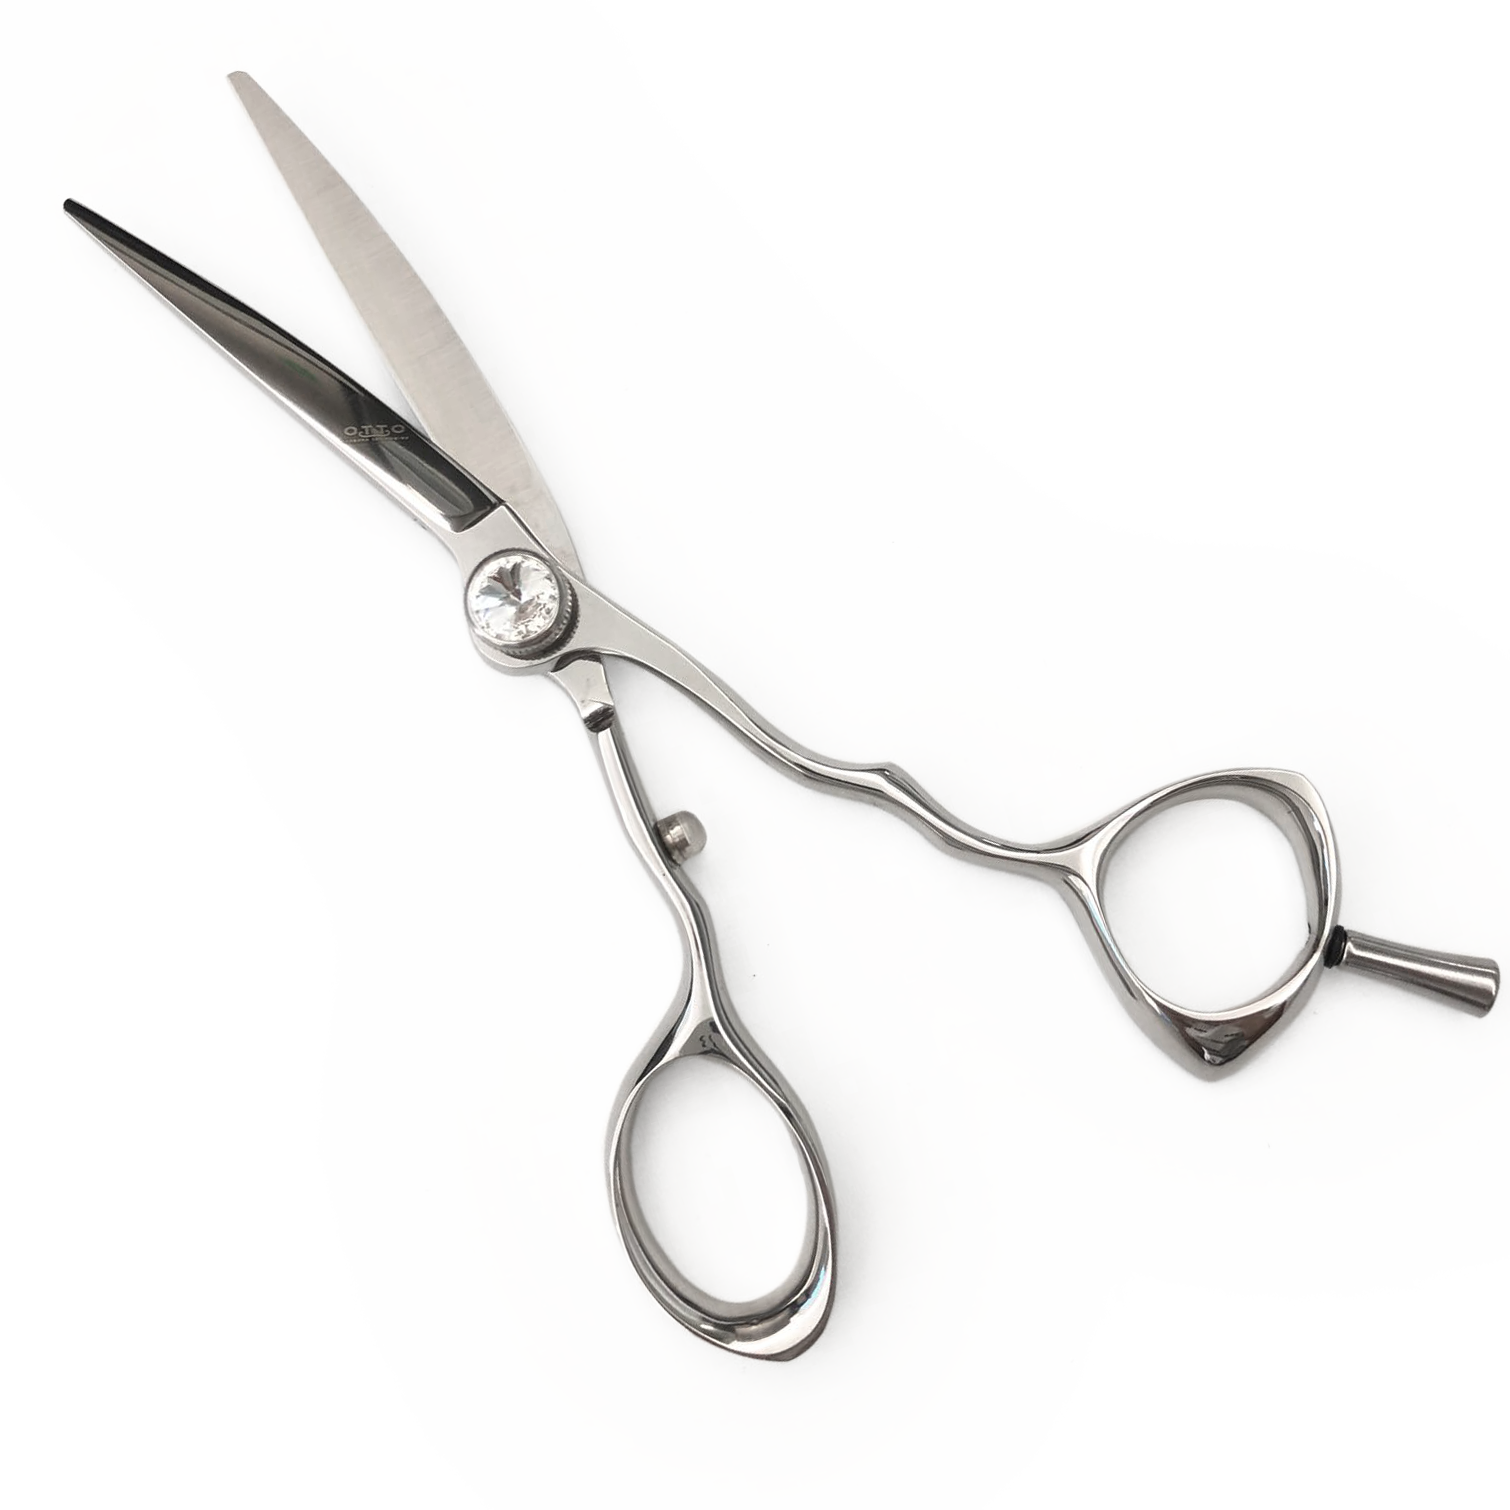 Otto Diamond Hair Cutting Shears A (6”) - by Otto |ProCare Outlet|